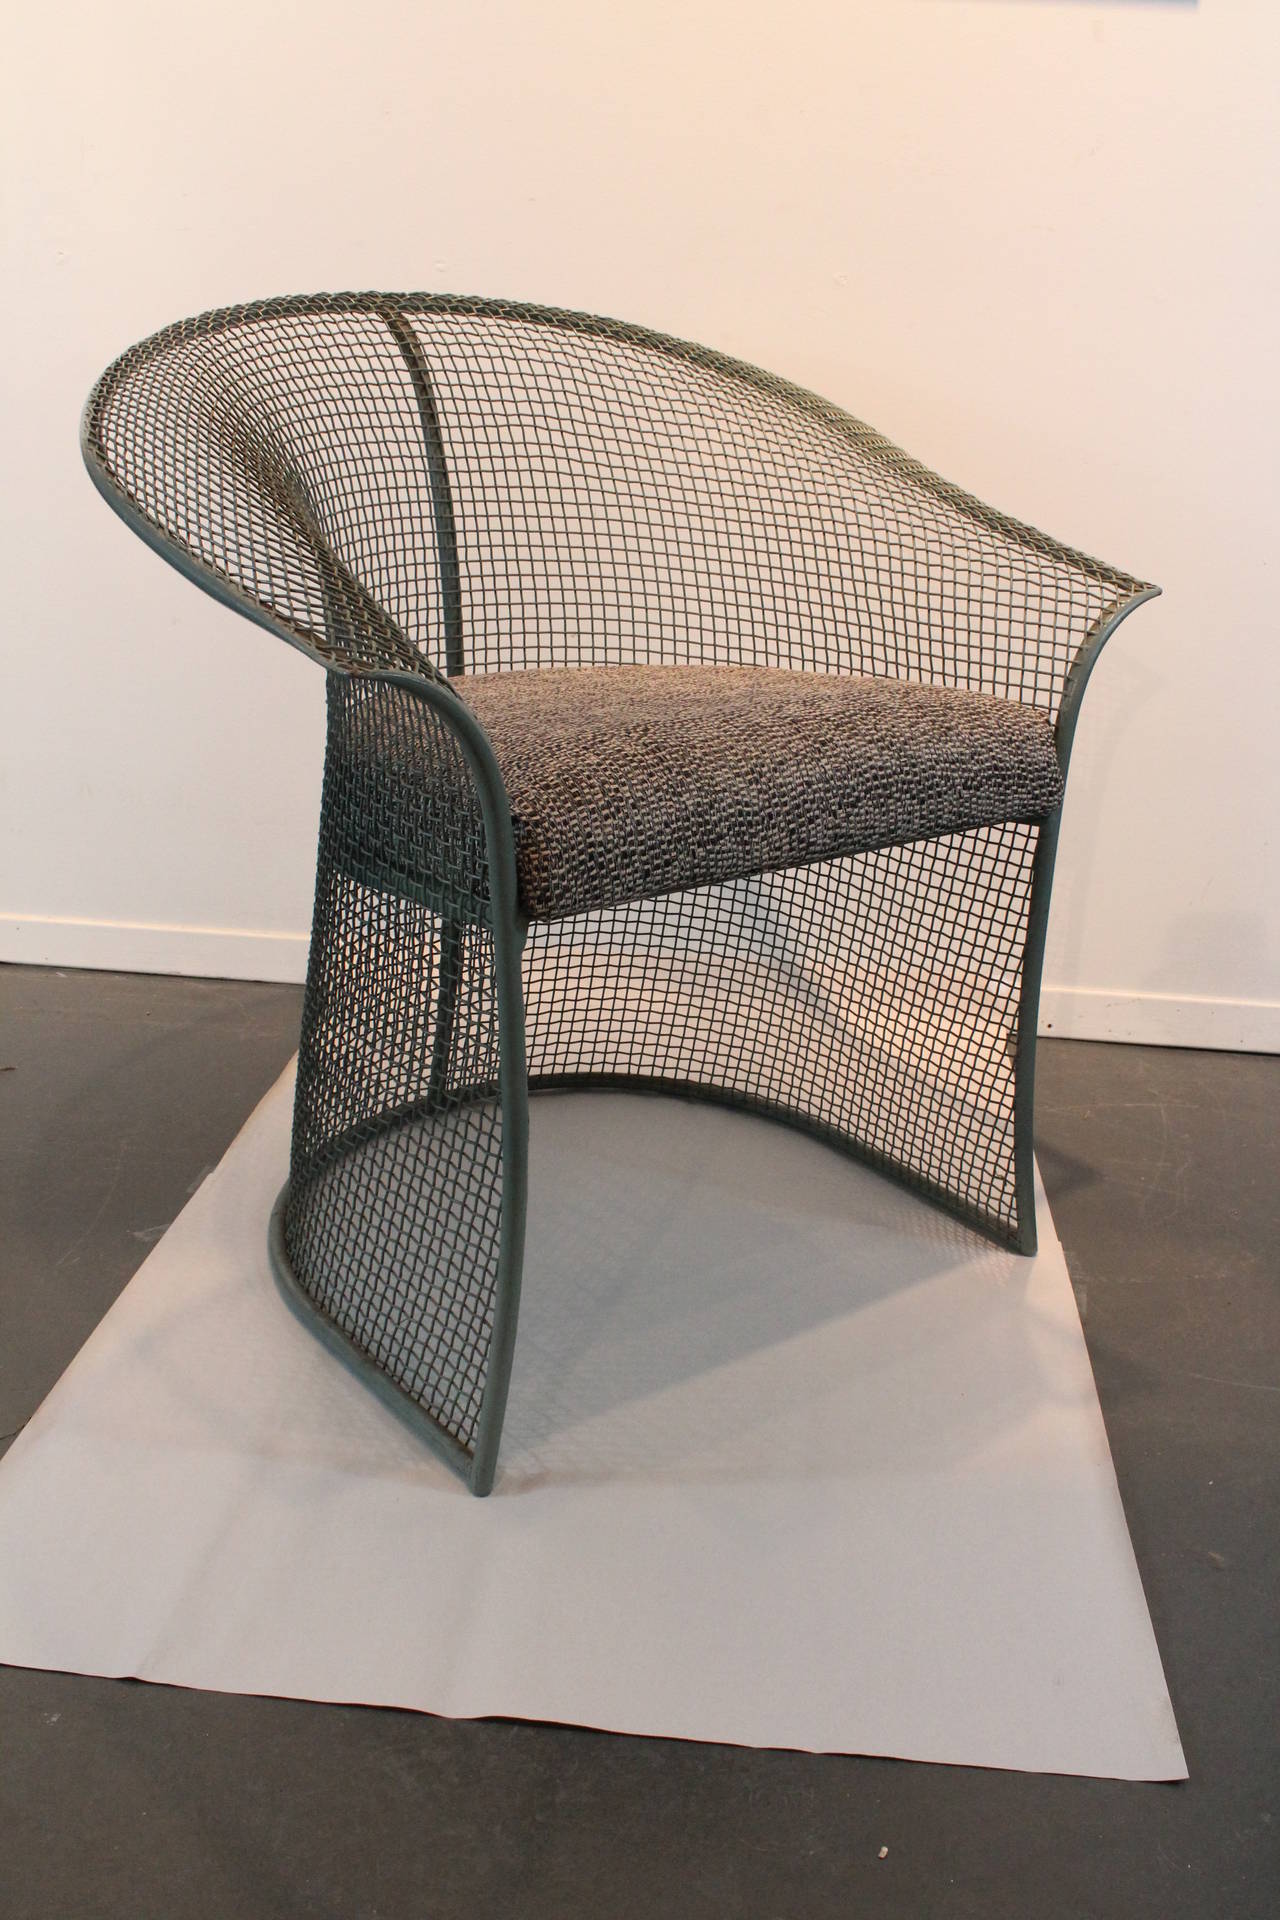 Rare Woodard Sculptura armchairs with the woven mesh being the leg and support structure.